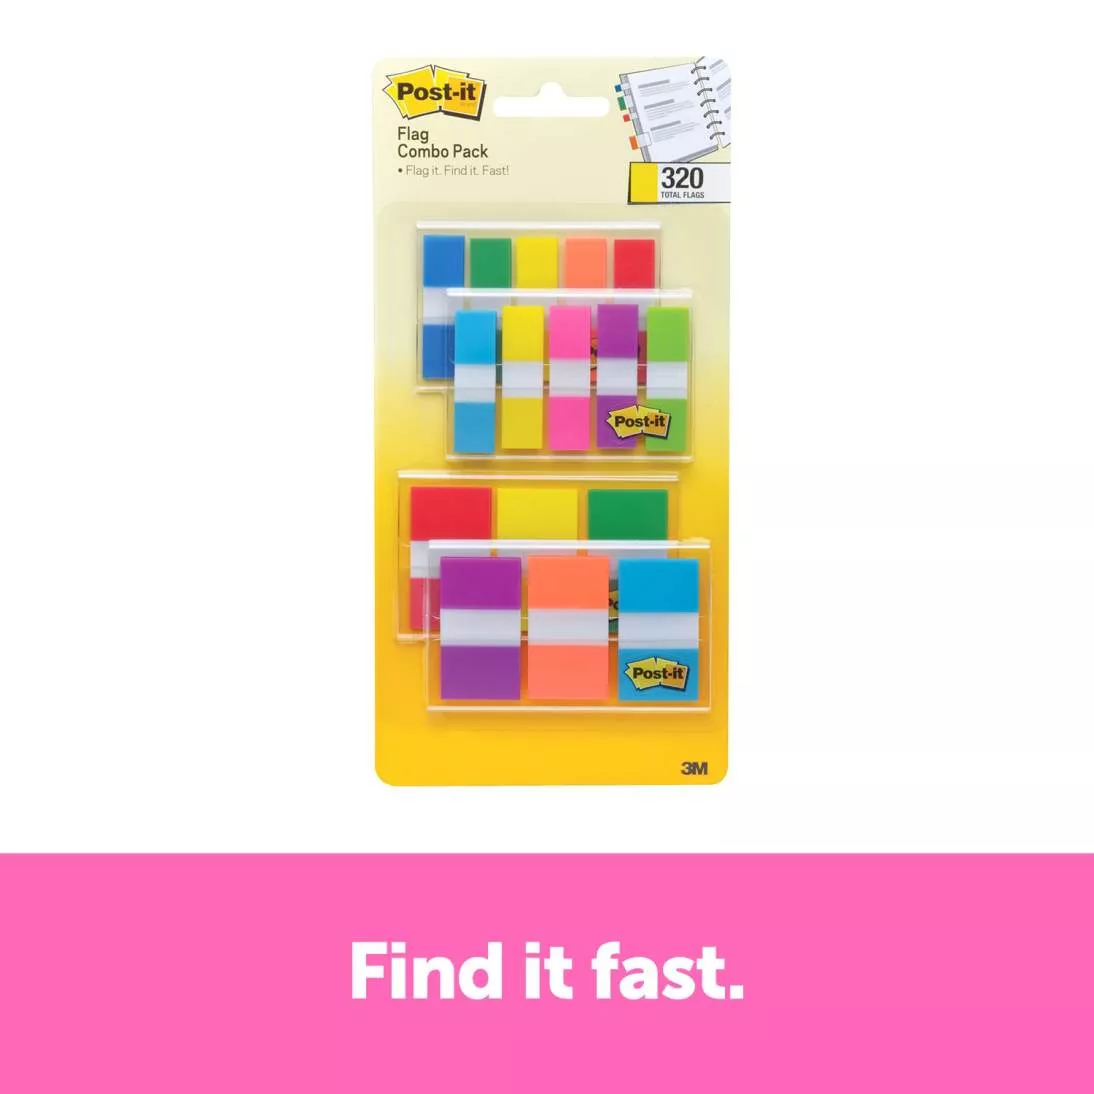 Post-it® Flags 683-XL1 Combo Pack, .47 in. x 1.7 in. flags and .94 in. x
1.7 in. flags